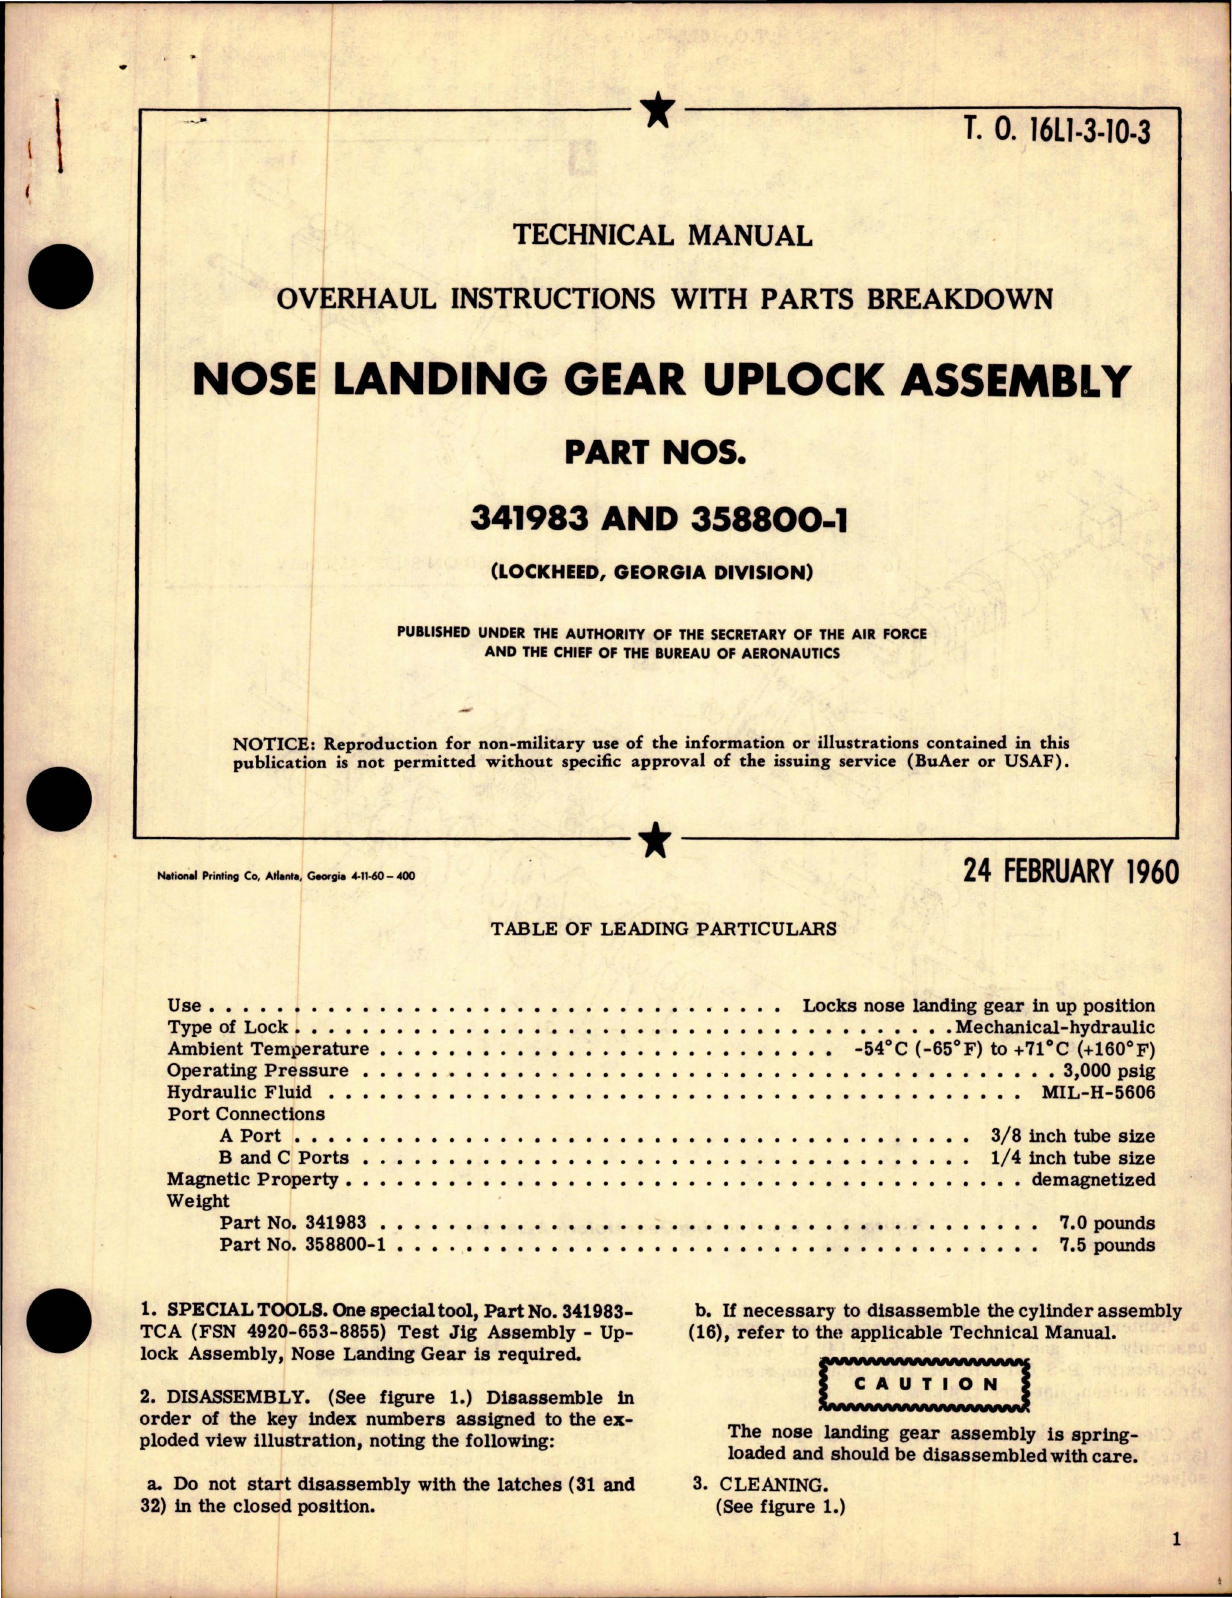 Sample page 1 from AirCorps Library document: Overhaul Instructions with Parts for Nose Landing Gear Uplock Assembly - Parts 341983 and 358800-1